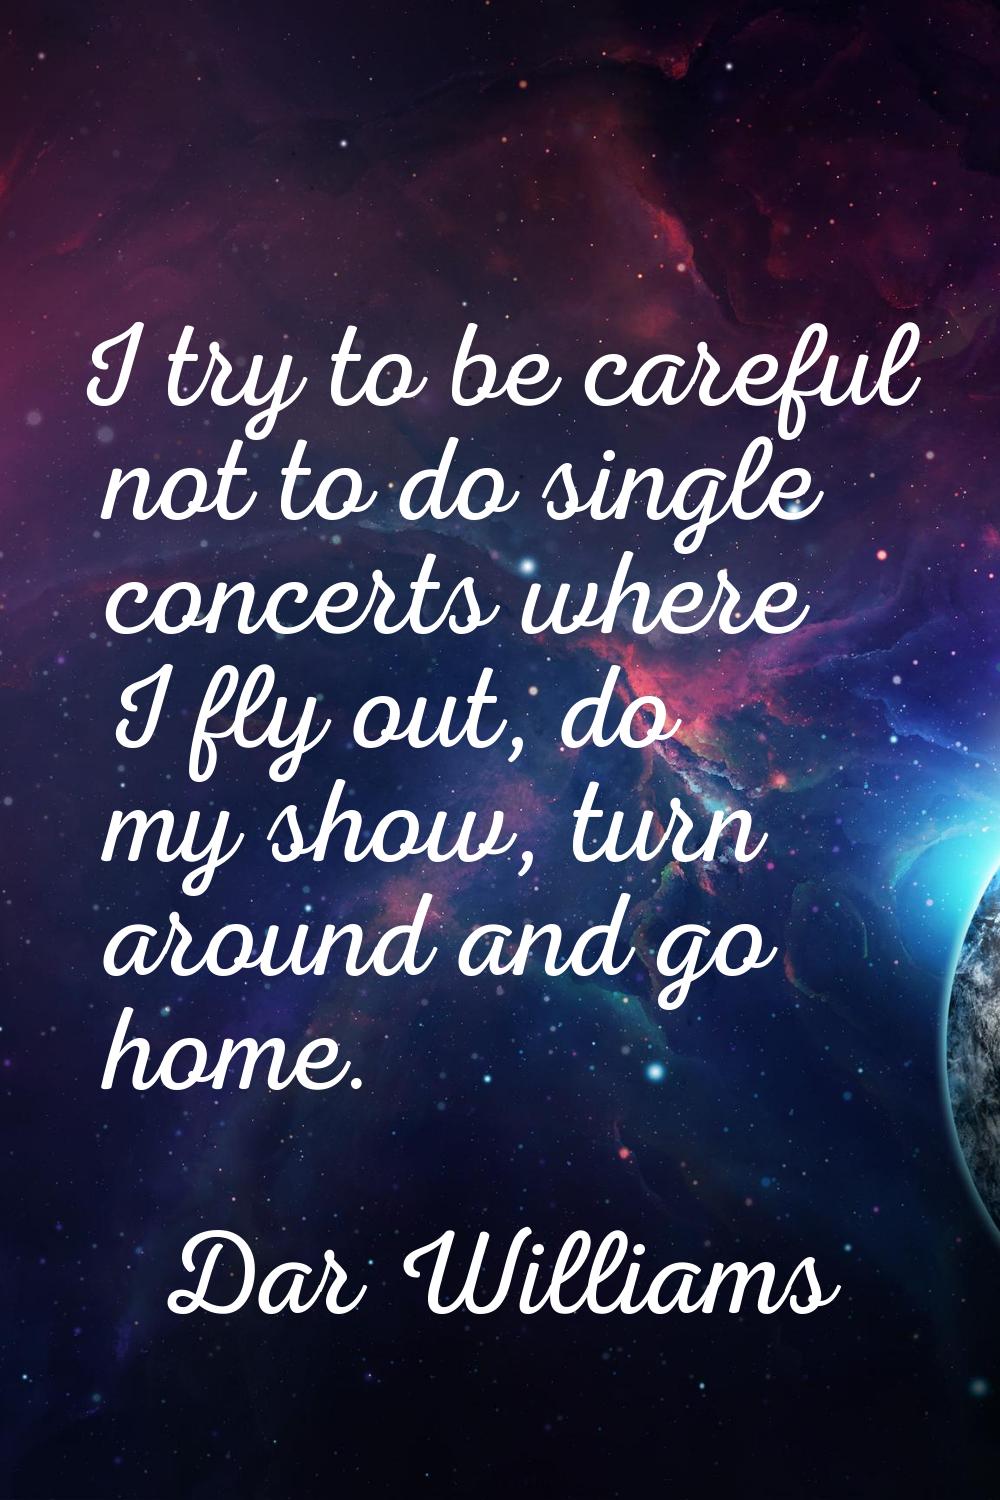 I try to be careful not to do single concerts where I fly out, do my show, turn around and go home.